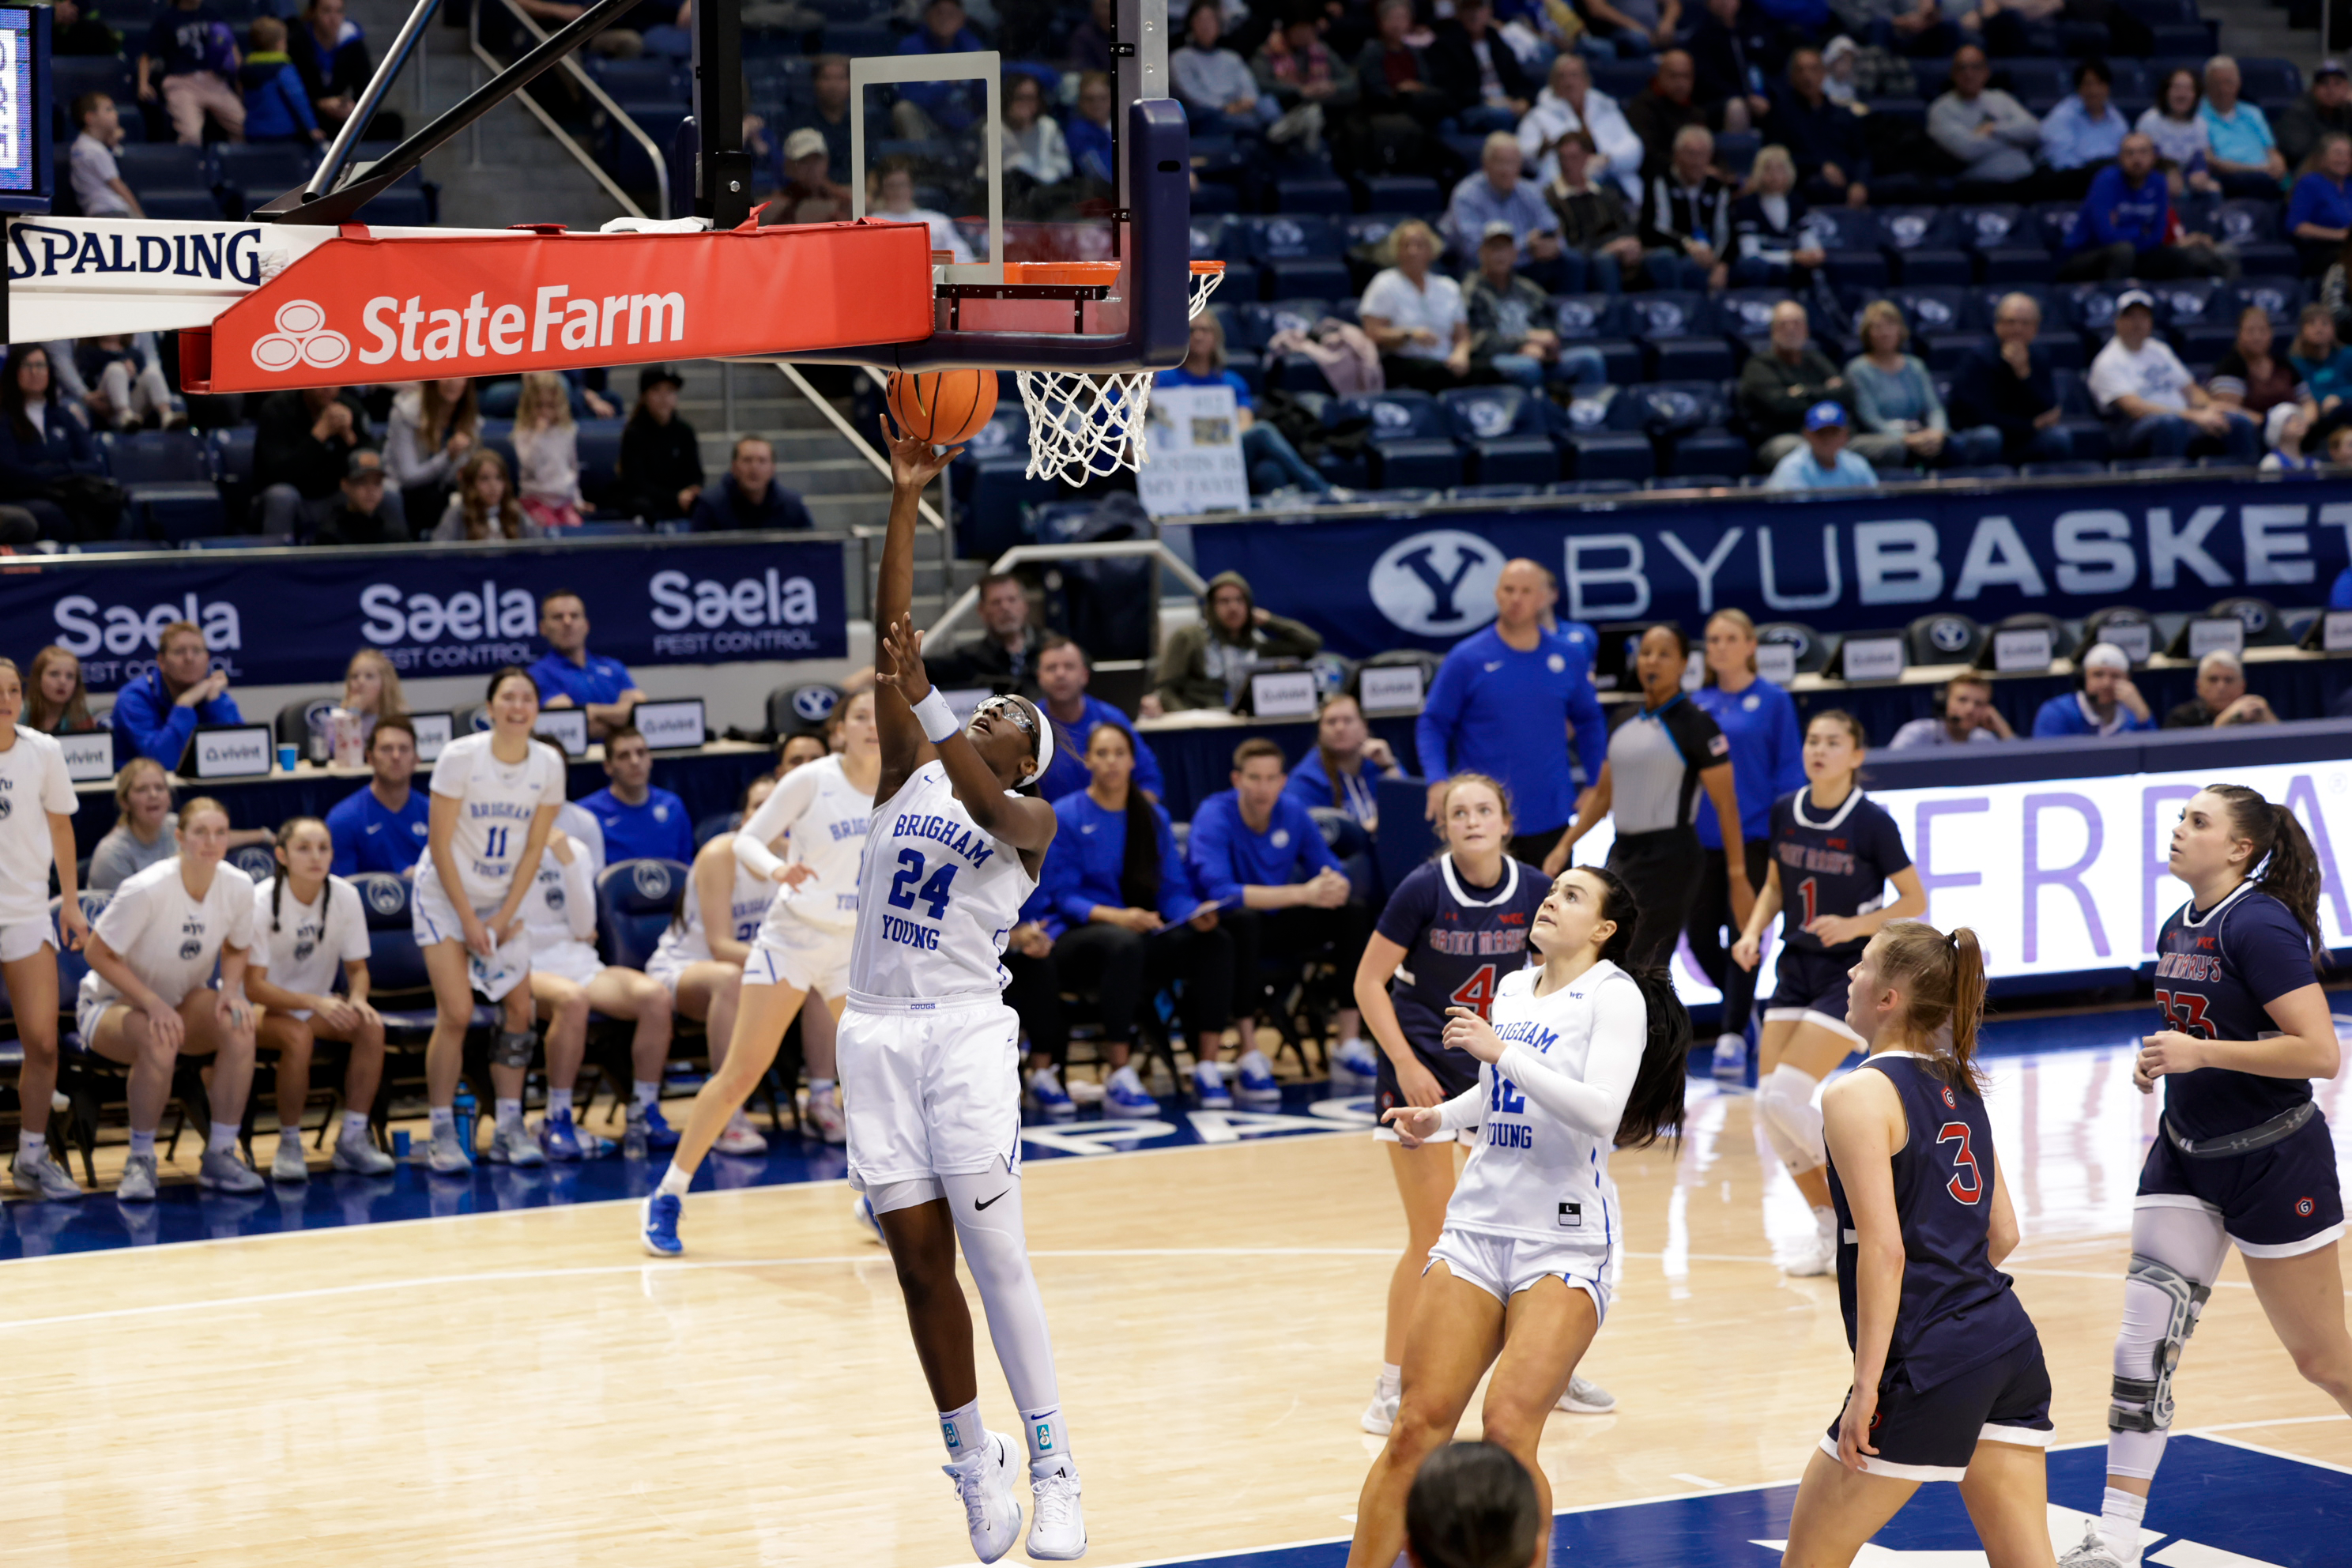 Rose Bubakar hits a shot during a game against Saint Mary's at the Marriott Center.